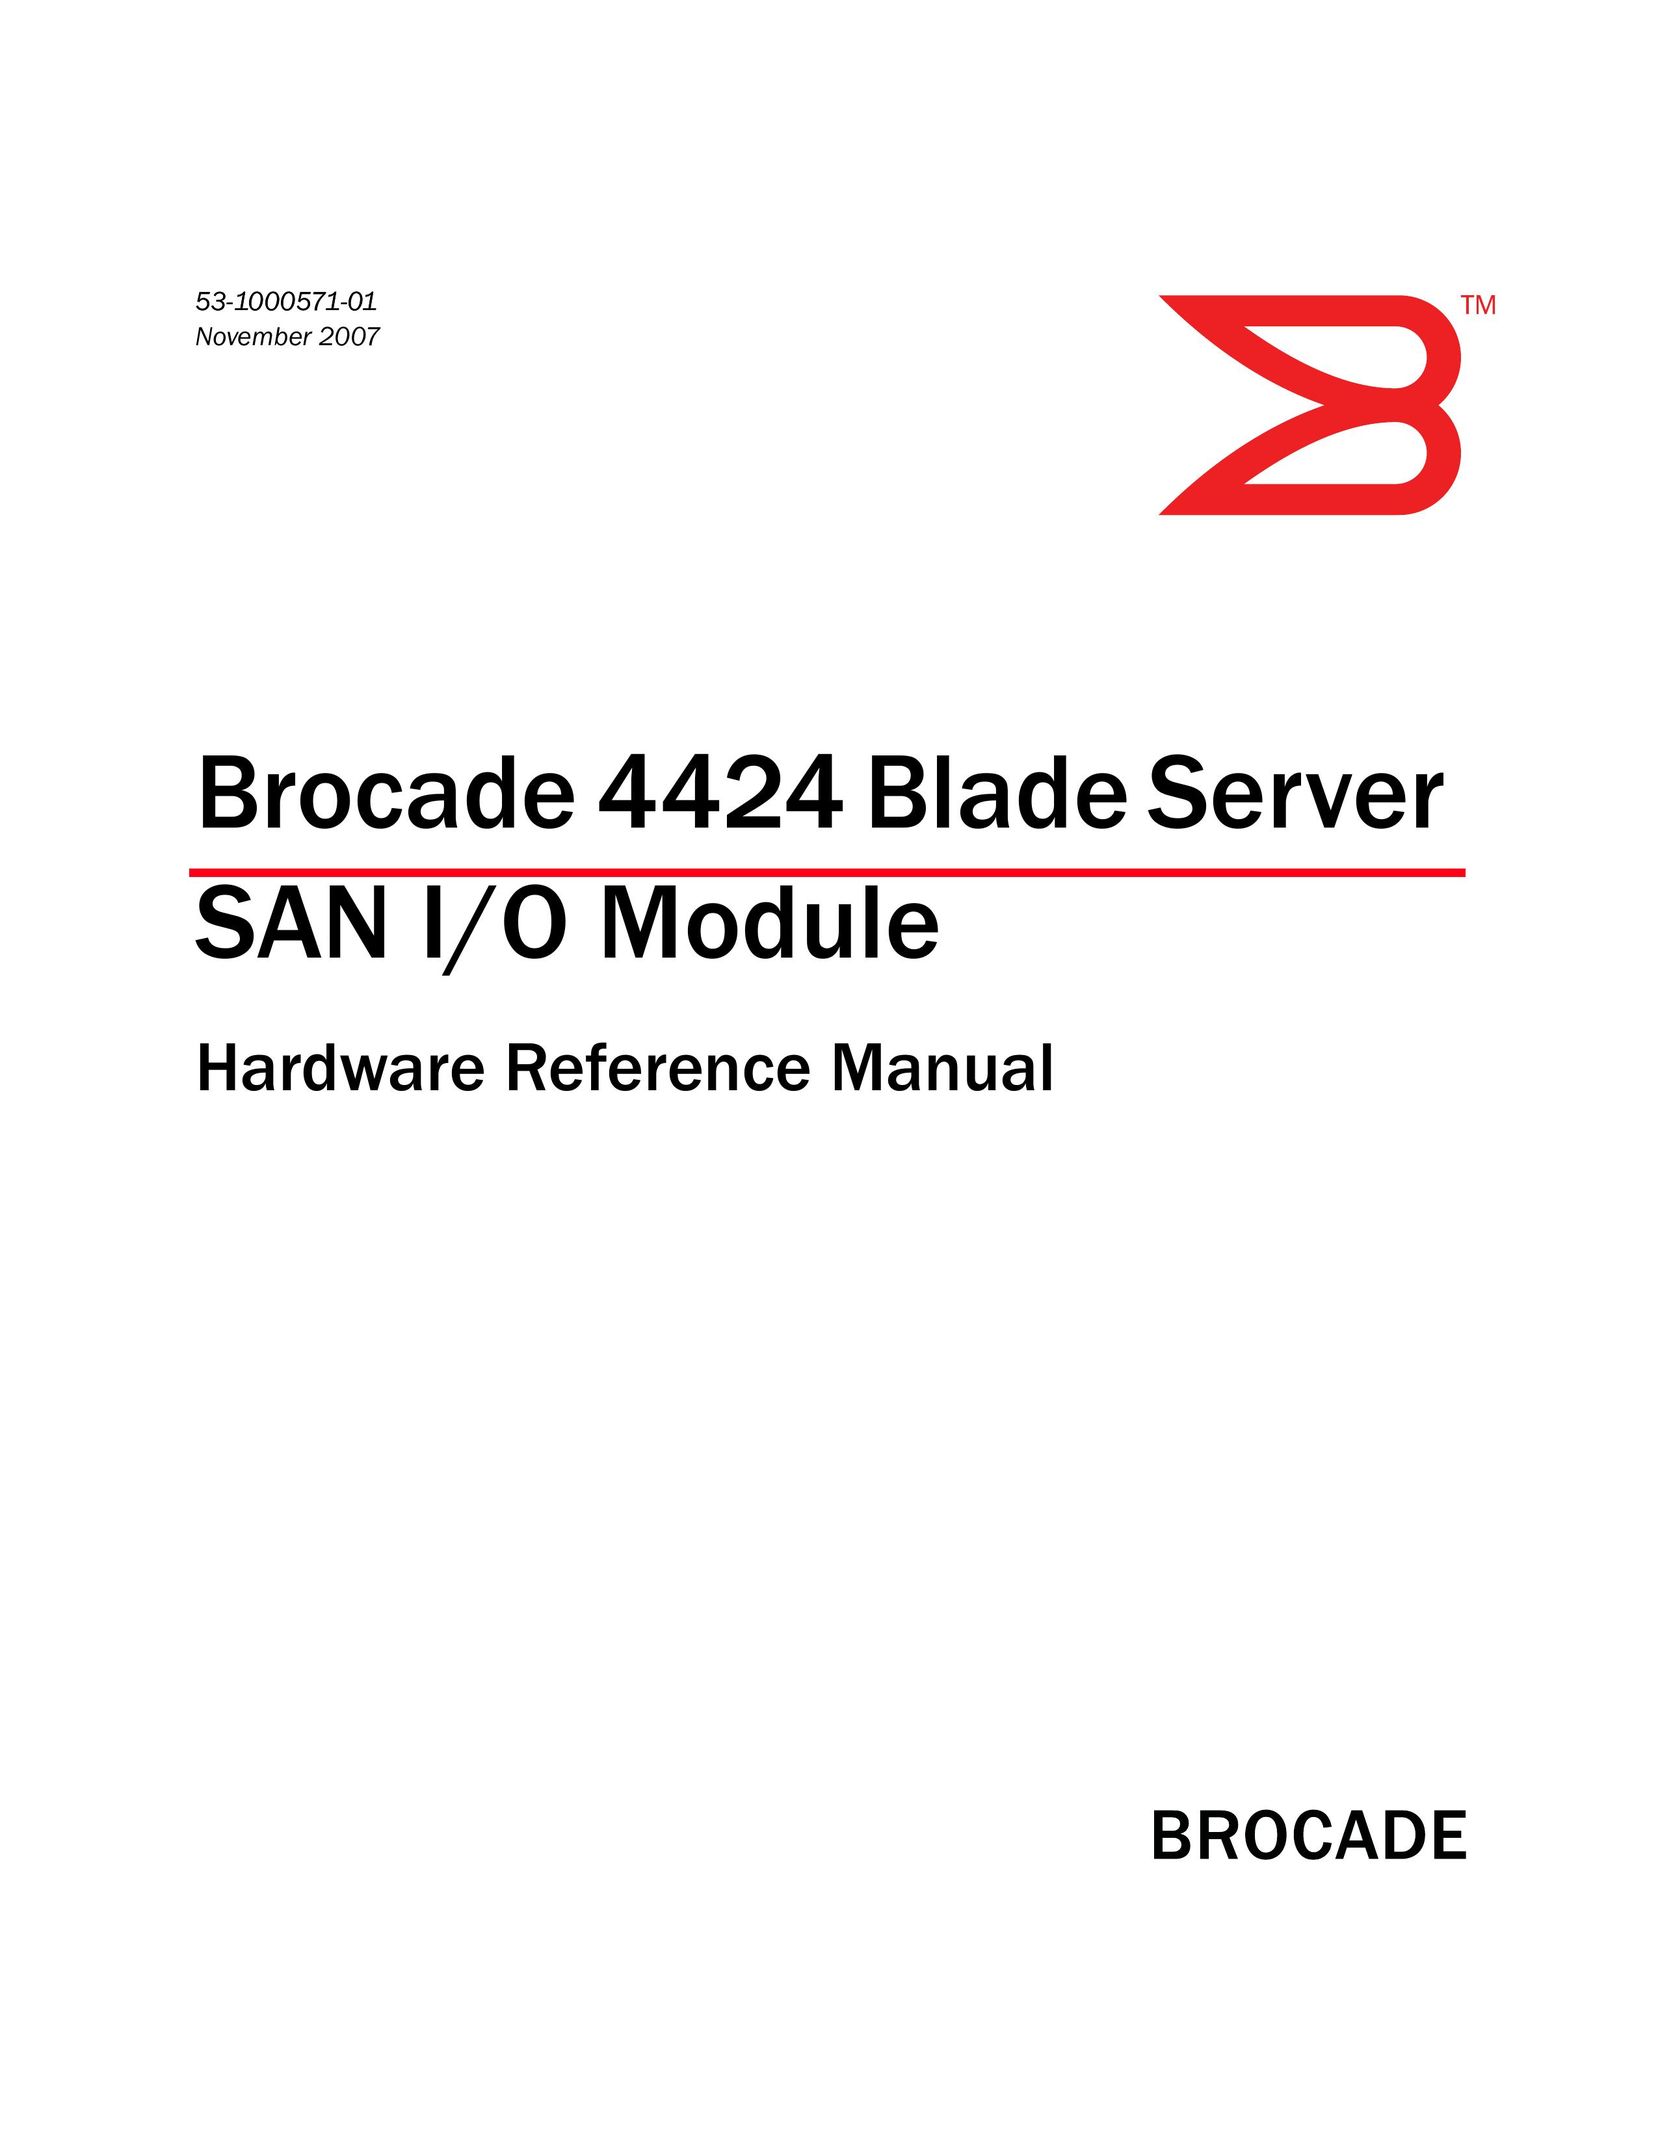 Brocade Communications Systems 4424 Server User Manual